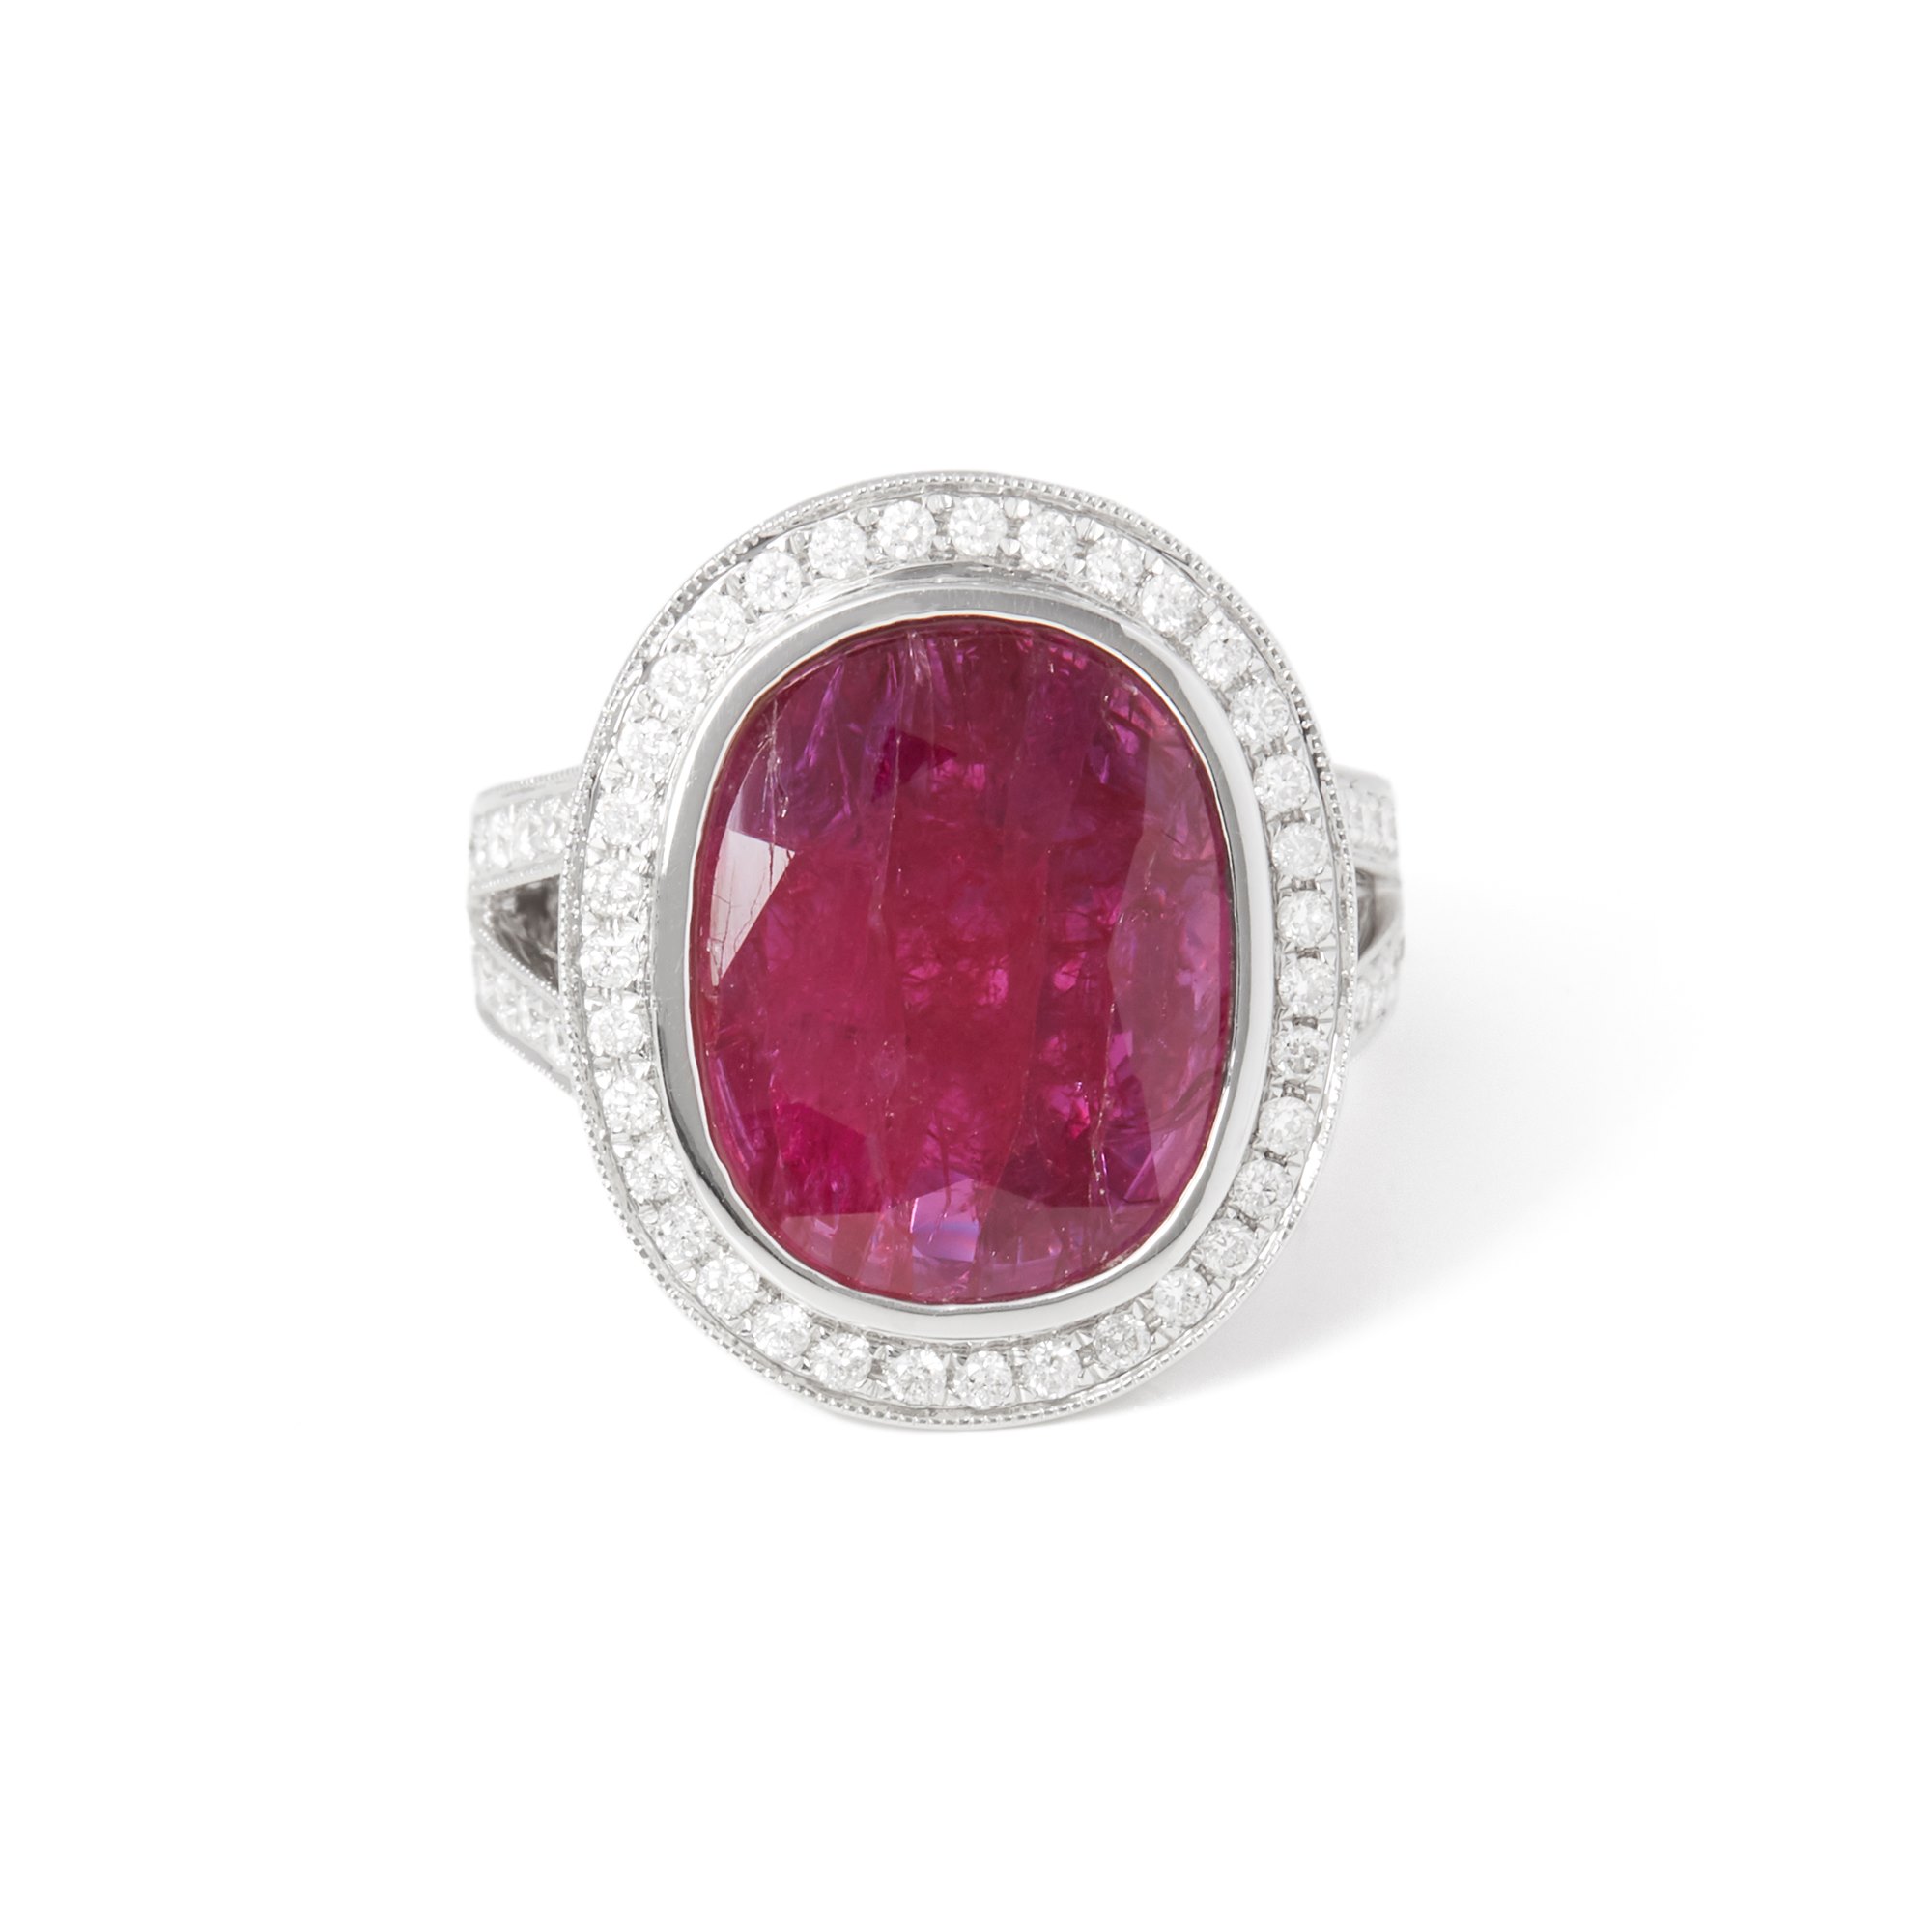 David Jerome Certified 7.1ct Oval Cut Ruby and Diamond 18ct Gold Ring